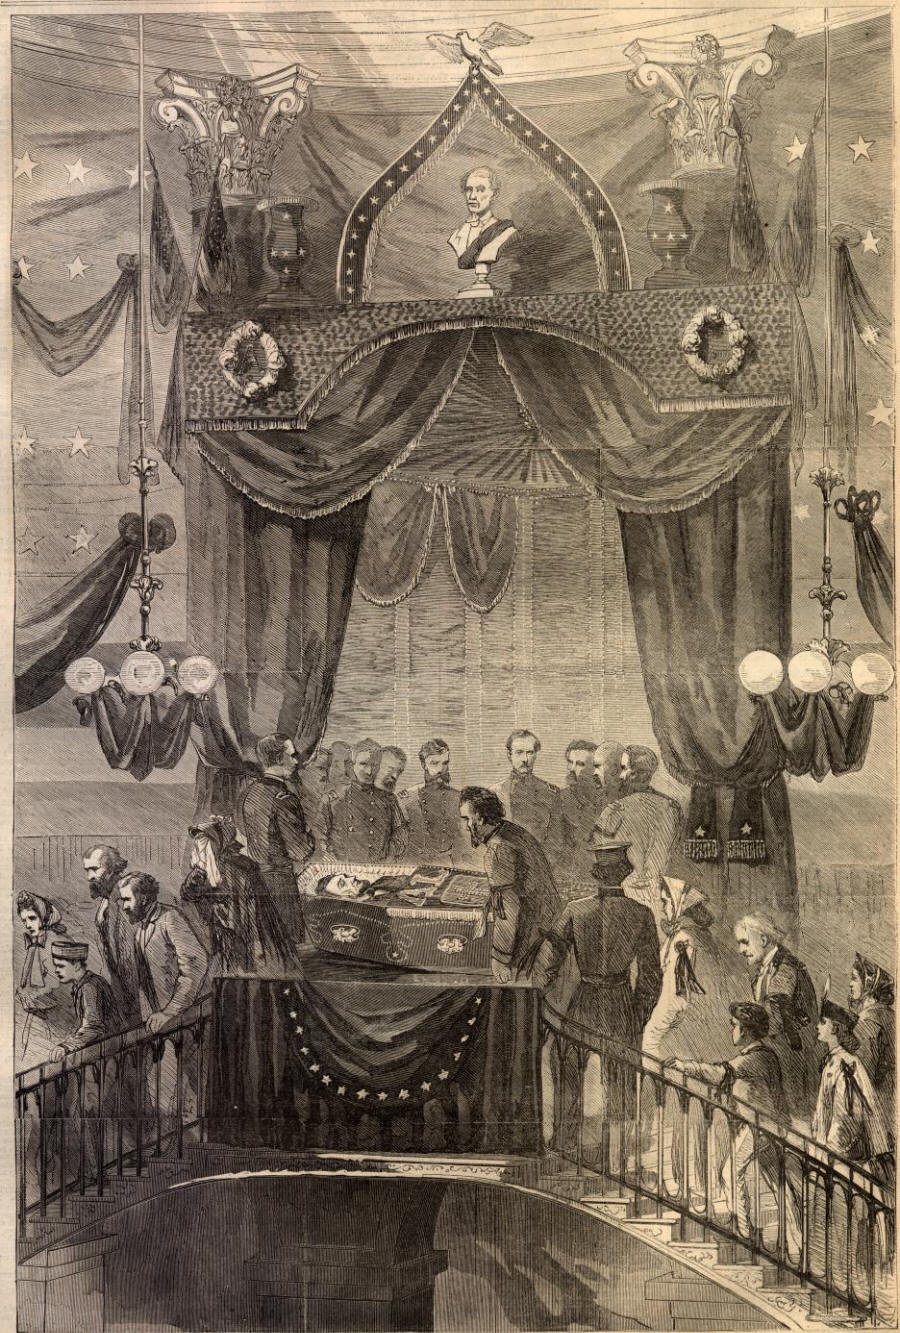 President Lincoln's Body in New York City Hall